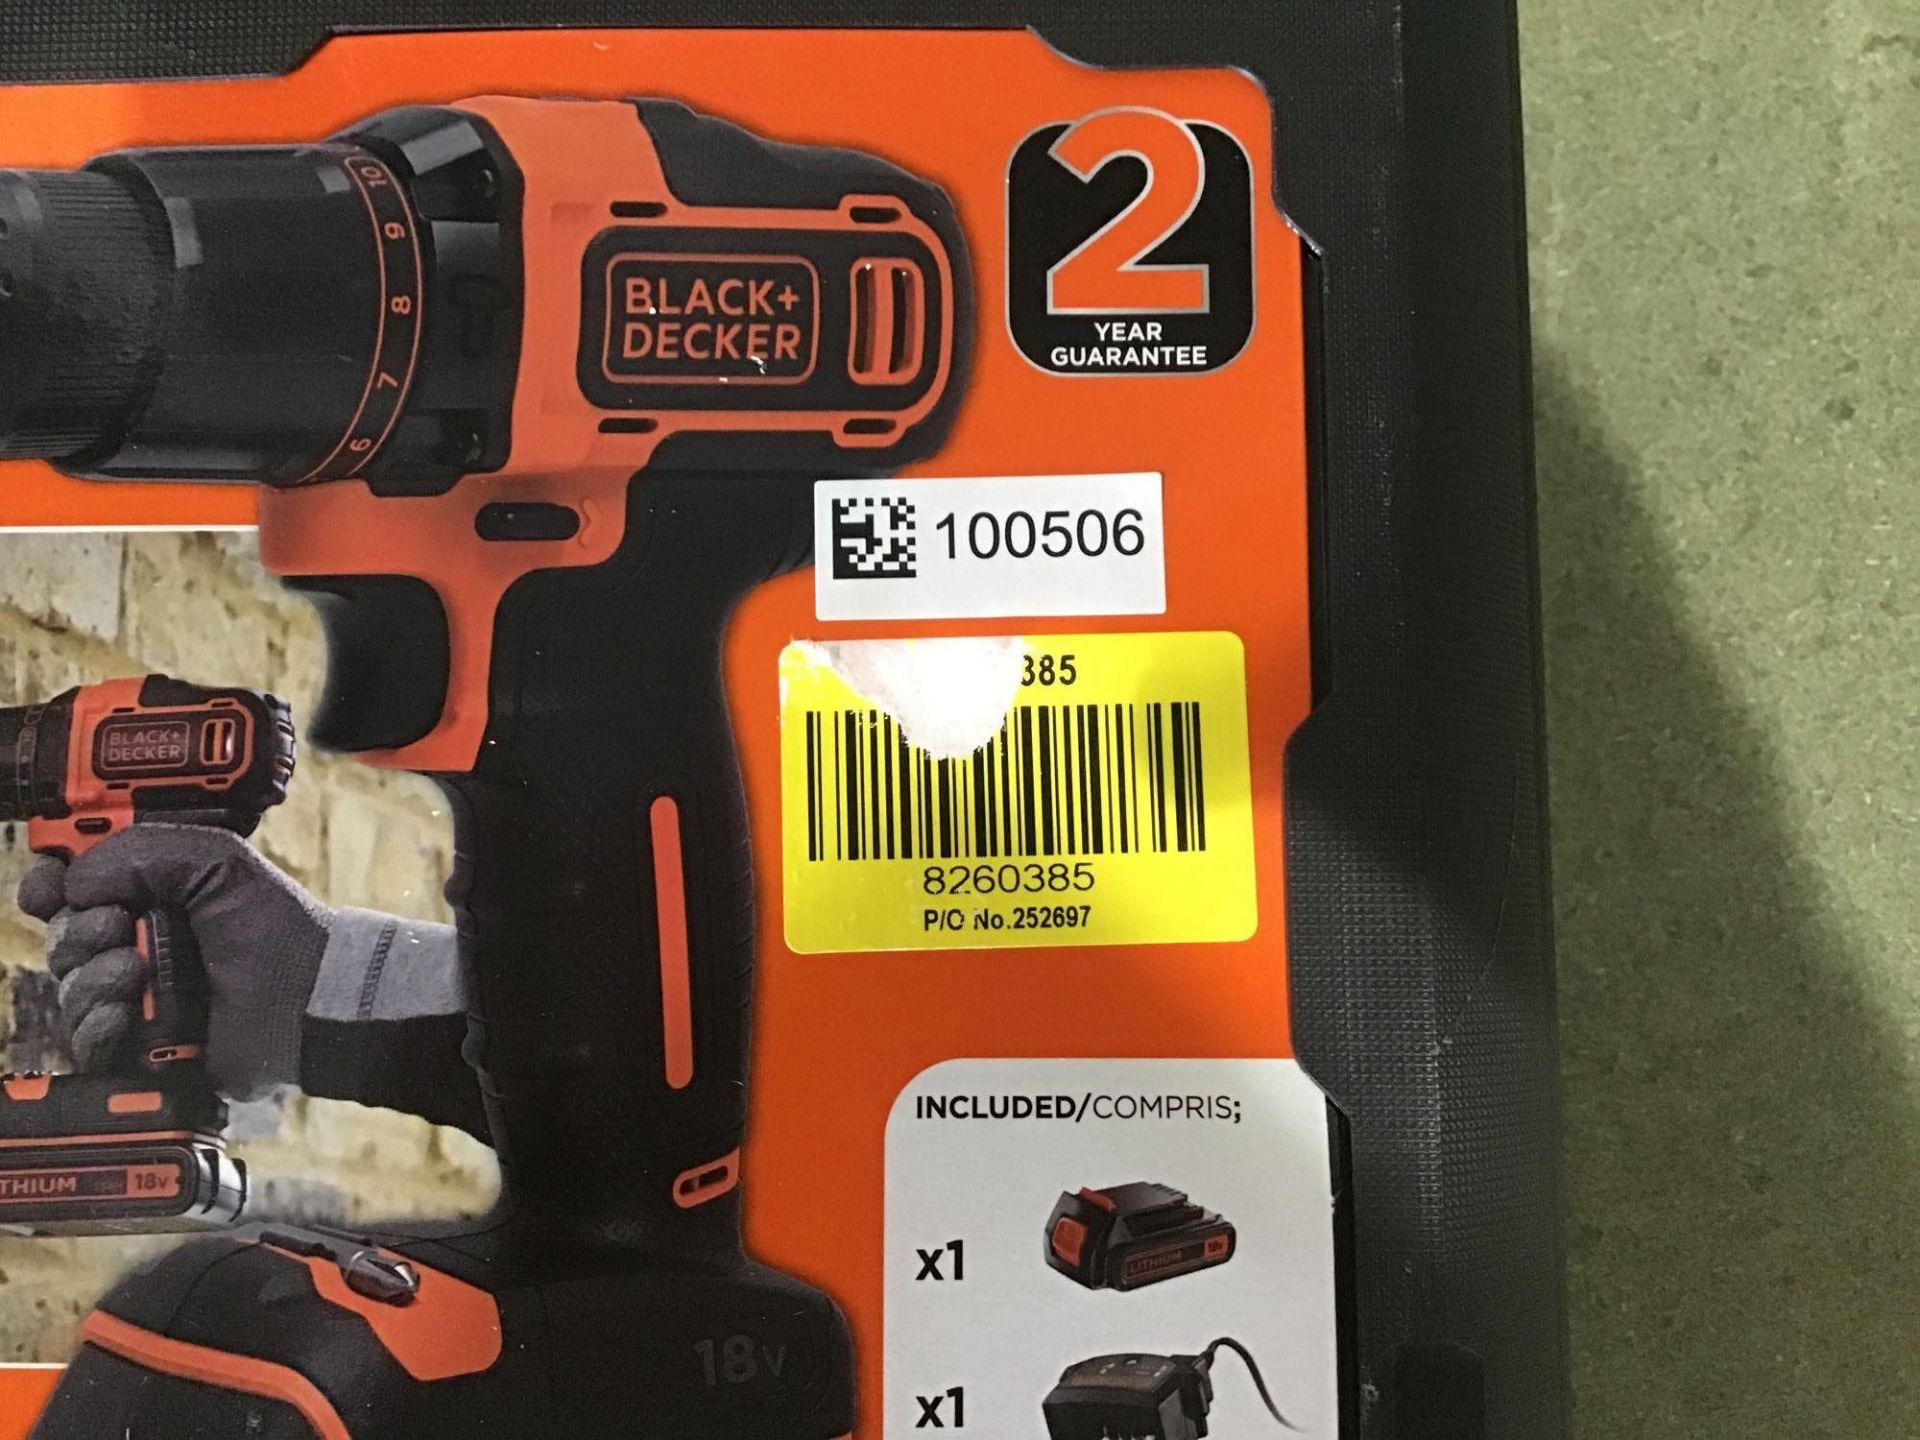 Black + Decker Cordless Hammer Drill with Battery - 18V - £50.00 RRP - Image 3 of 3